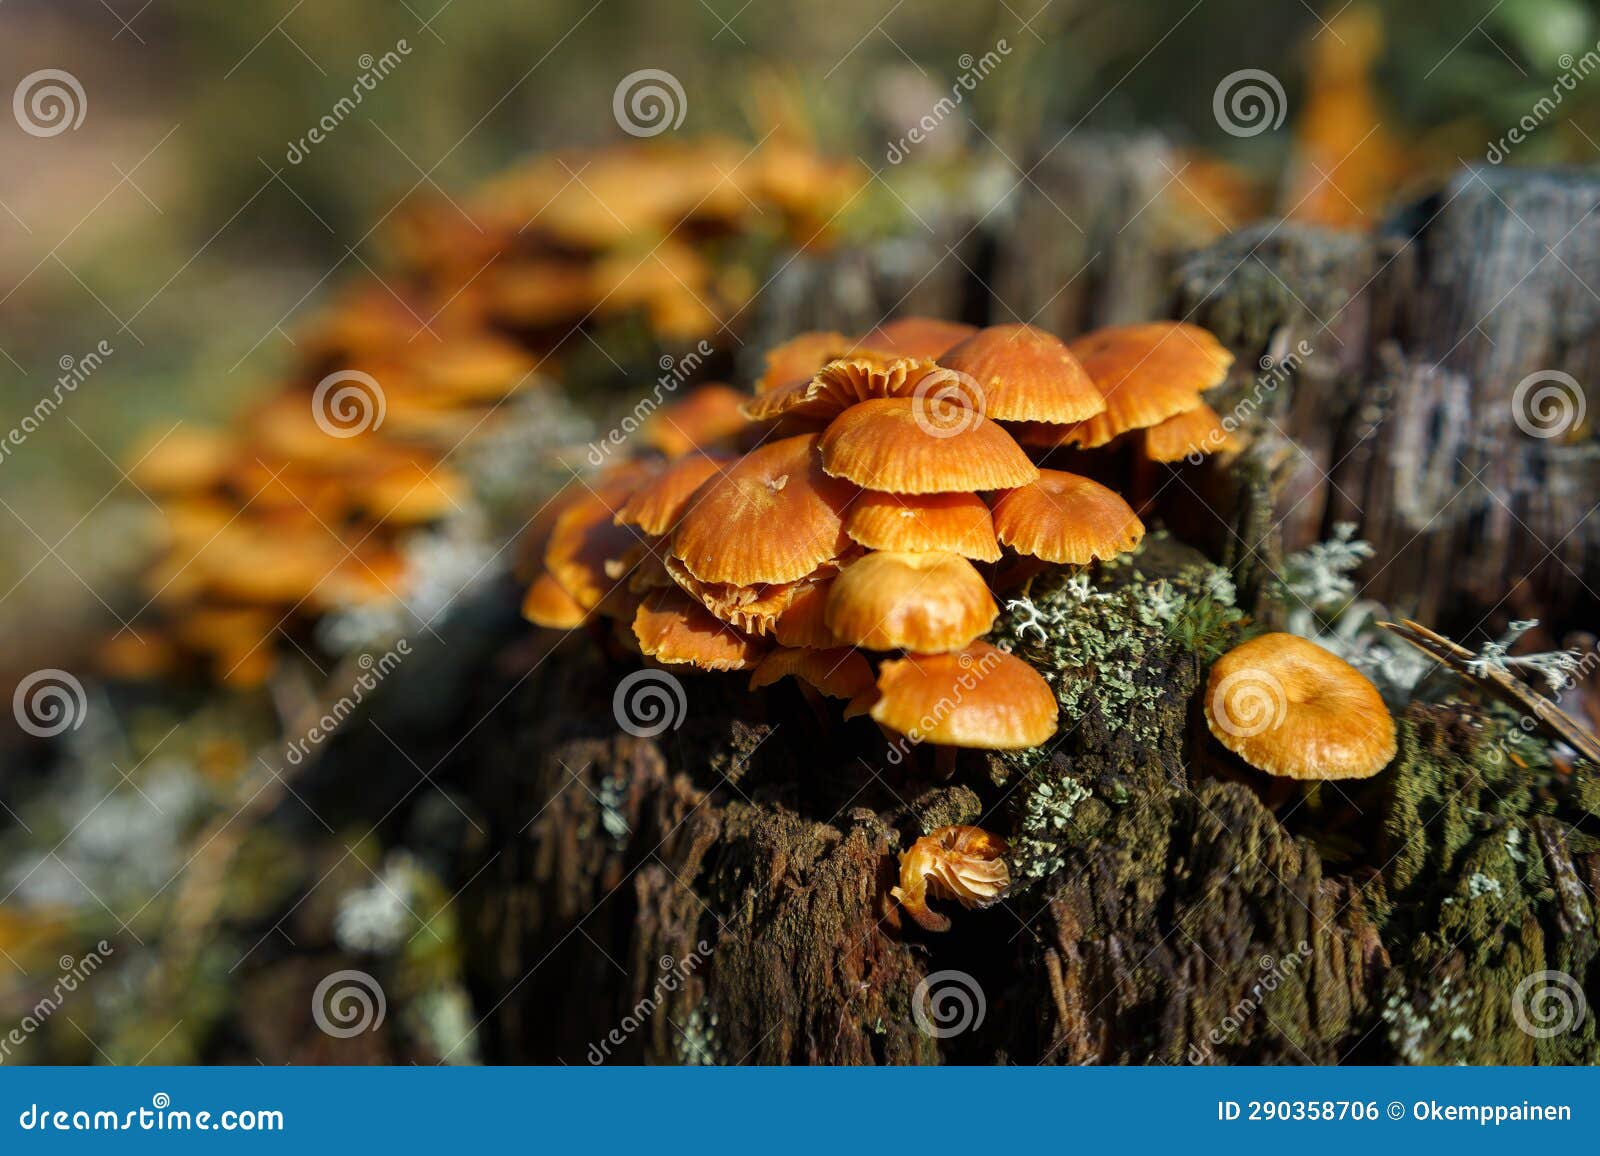 close up view of the group of xeromphalina campanella mushroom